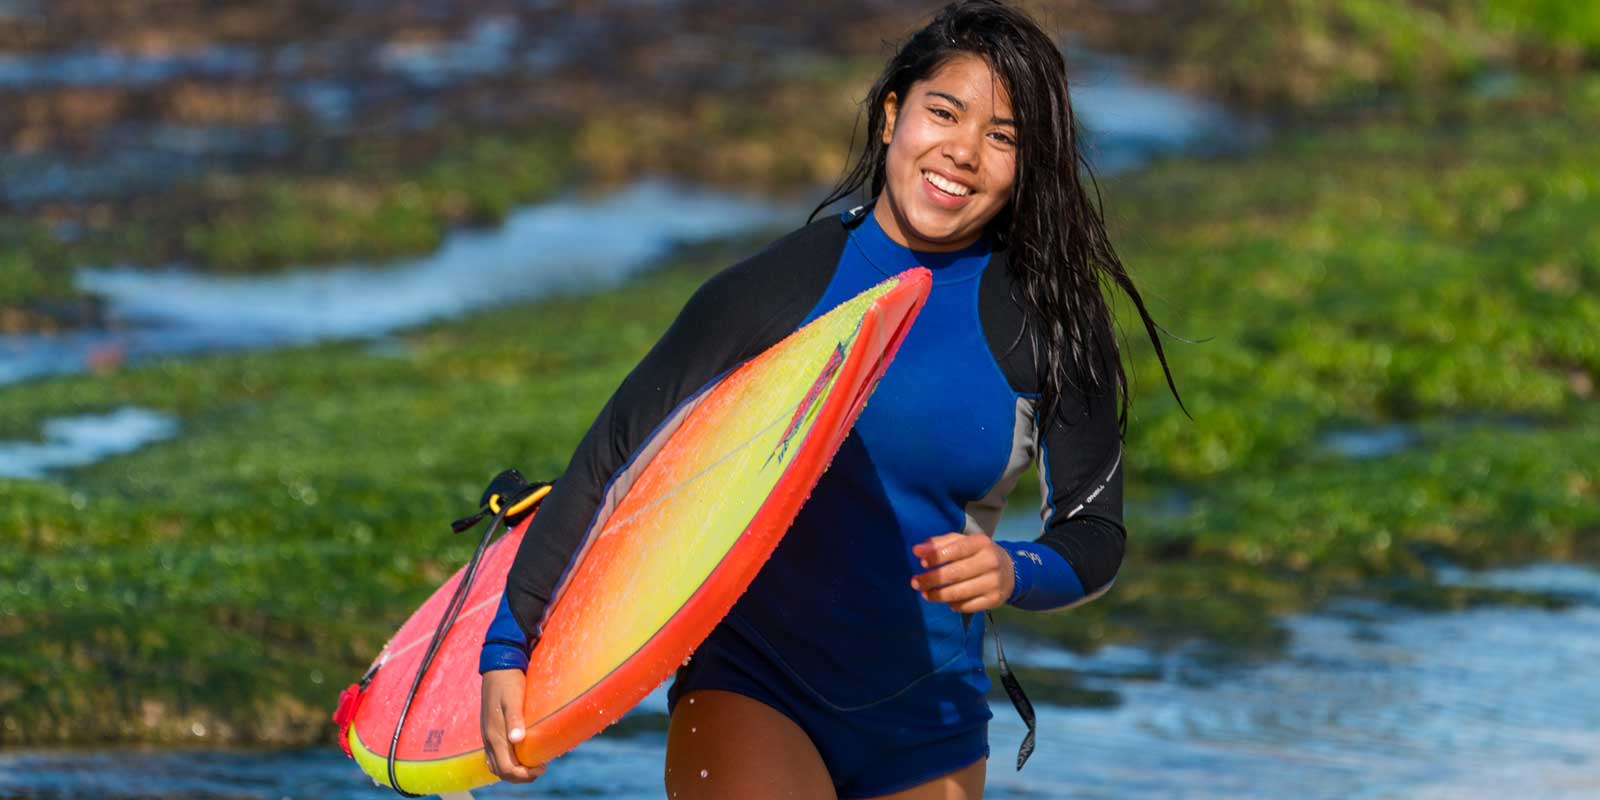 Woman wearing a rashguard and carrying a surfboard on a beach